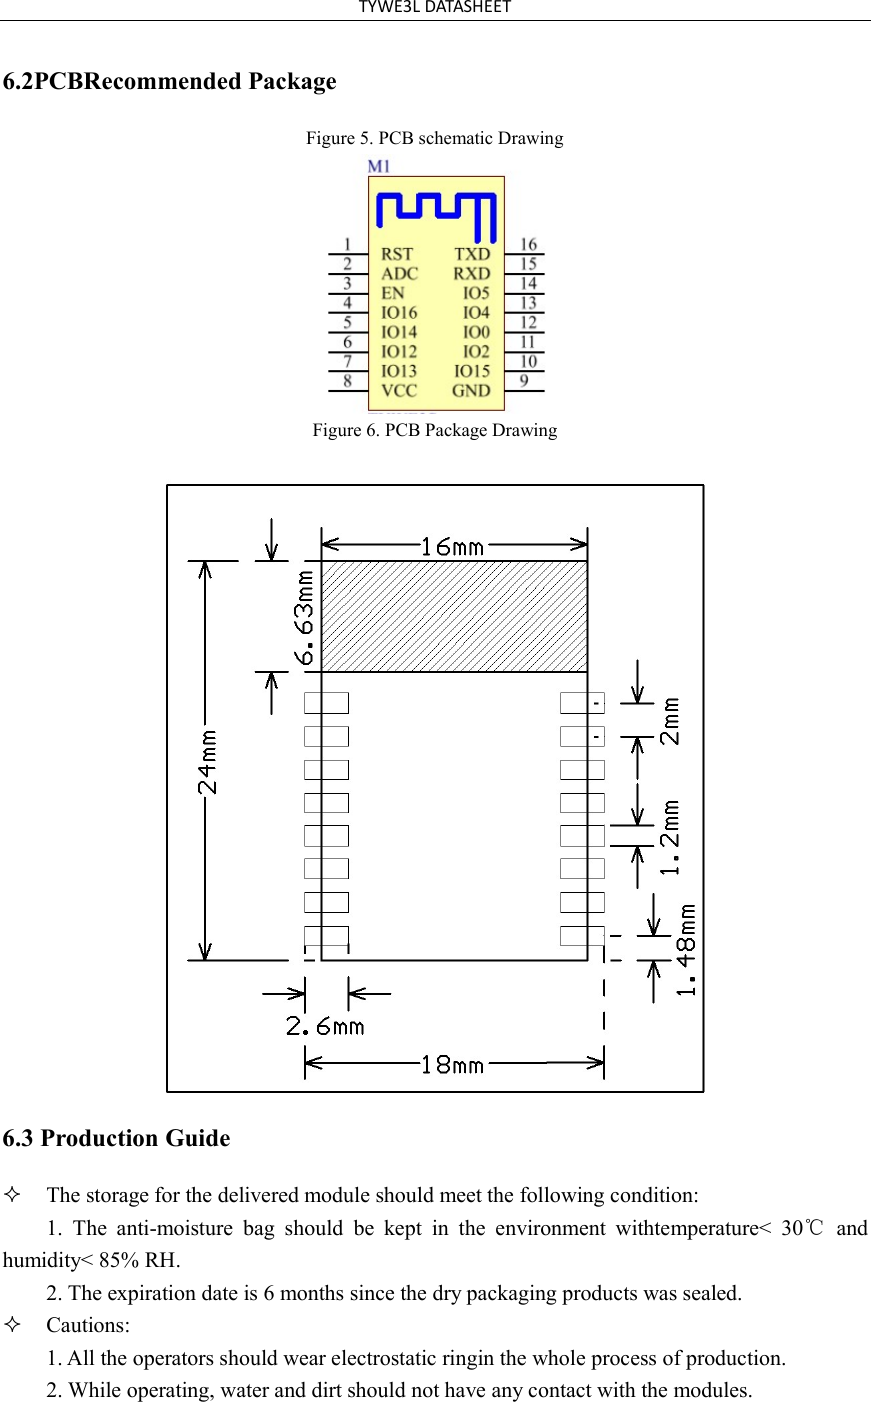 TYWE3L DATASHEET 6.2PCBRecommended Package Figure 5. PCB schematic Drawing Figure 6. PCB Package Drawing 6.3 Production Guide The storage for the delivered module should meet the following condition:1. The  anti-moisture  bag  should  be  kept  in  the  environment  withtemperature&lt;  30℃  andhumidity&lt; 85% RH. 2. The expiration date is 6 months since the dry packaging products was sealed.Cautions:1. All the operators should wear electrostatic ringin the whole process of production.2. While operating, water and dirt should not have any contact with the modules.